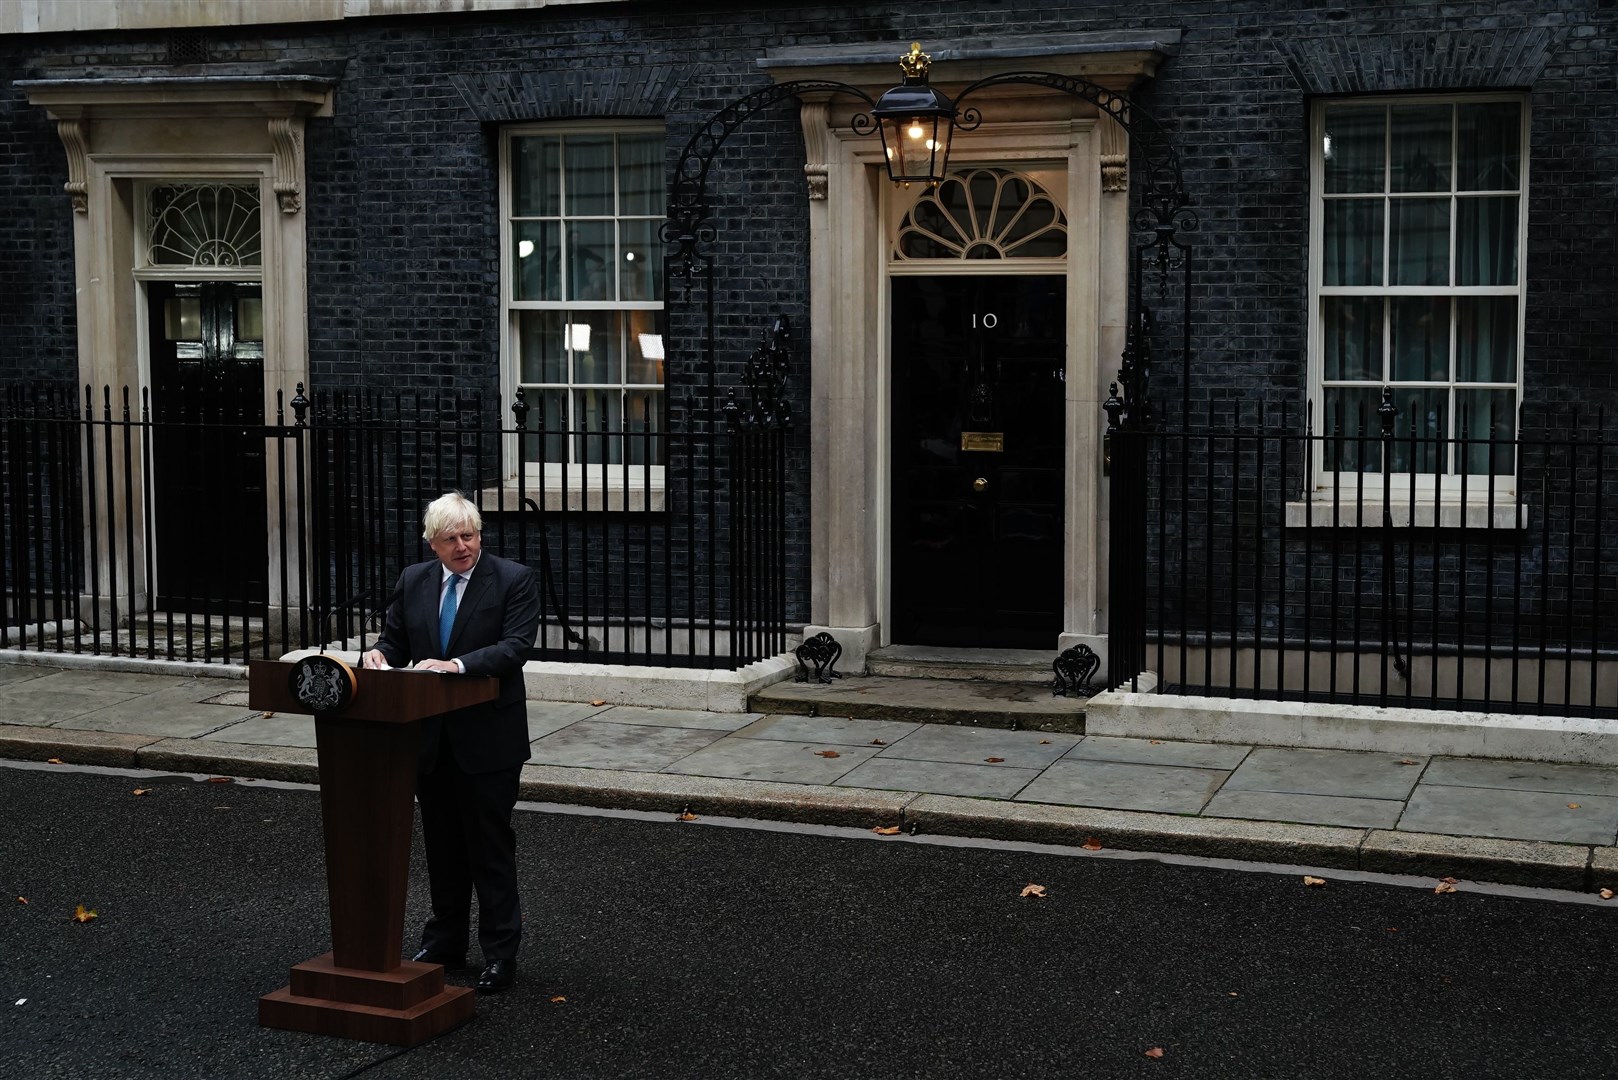 Outgoing Prime Minister Boris Johnson makes a speech outside 10 Downing Street before leaving for Balmoral for an audience with the Queen (Aaron Chown/PA)